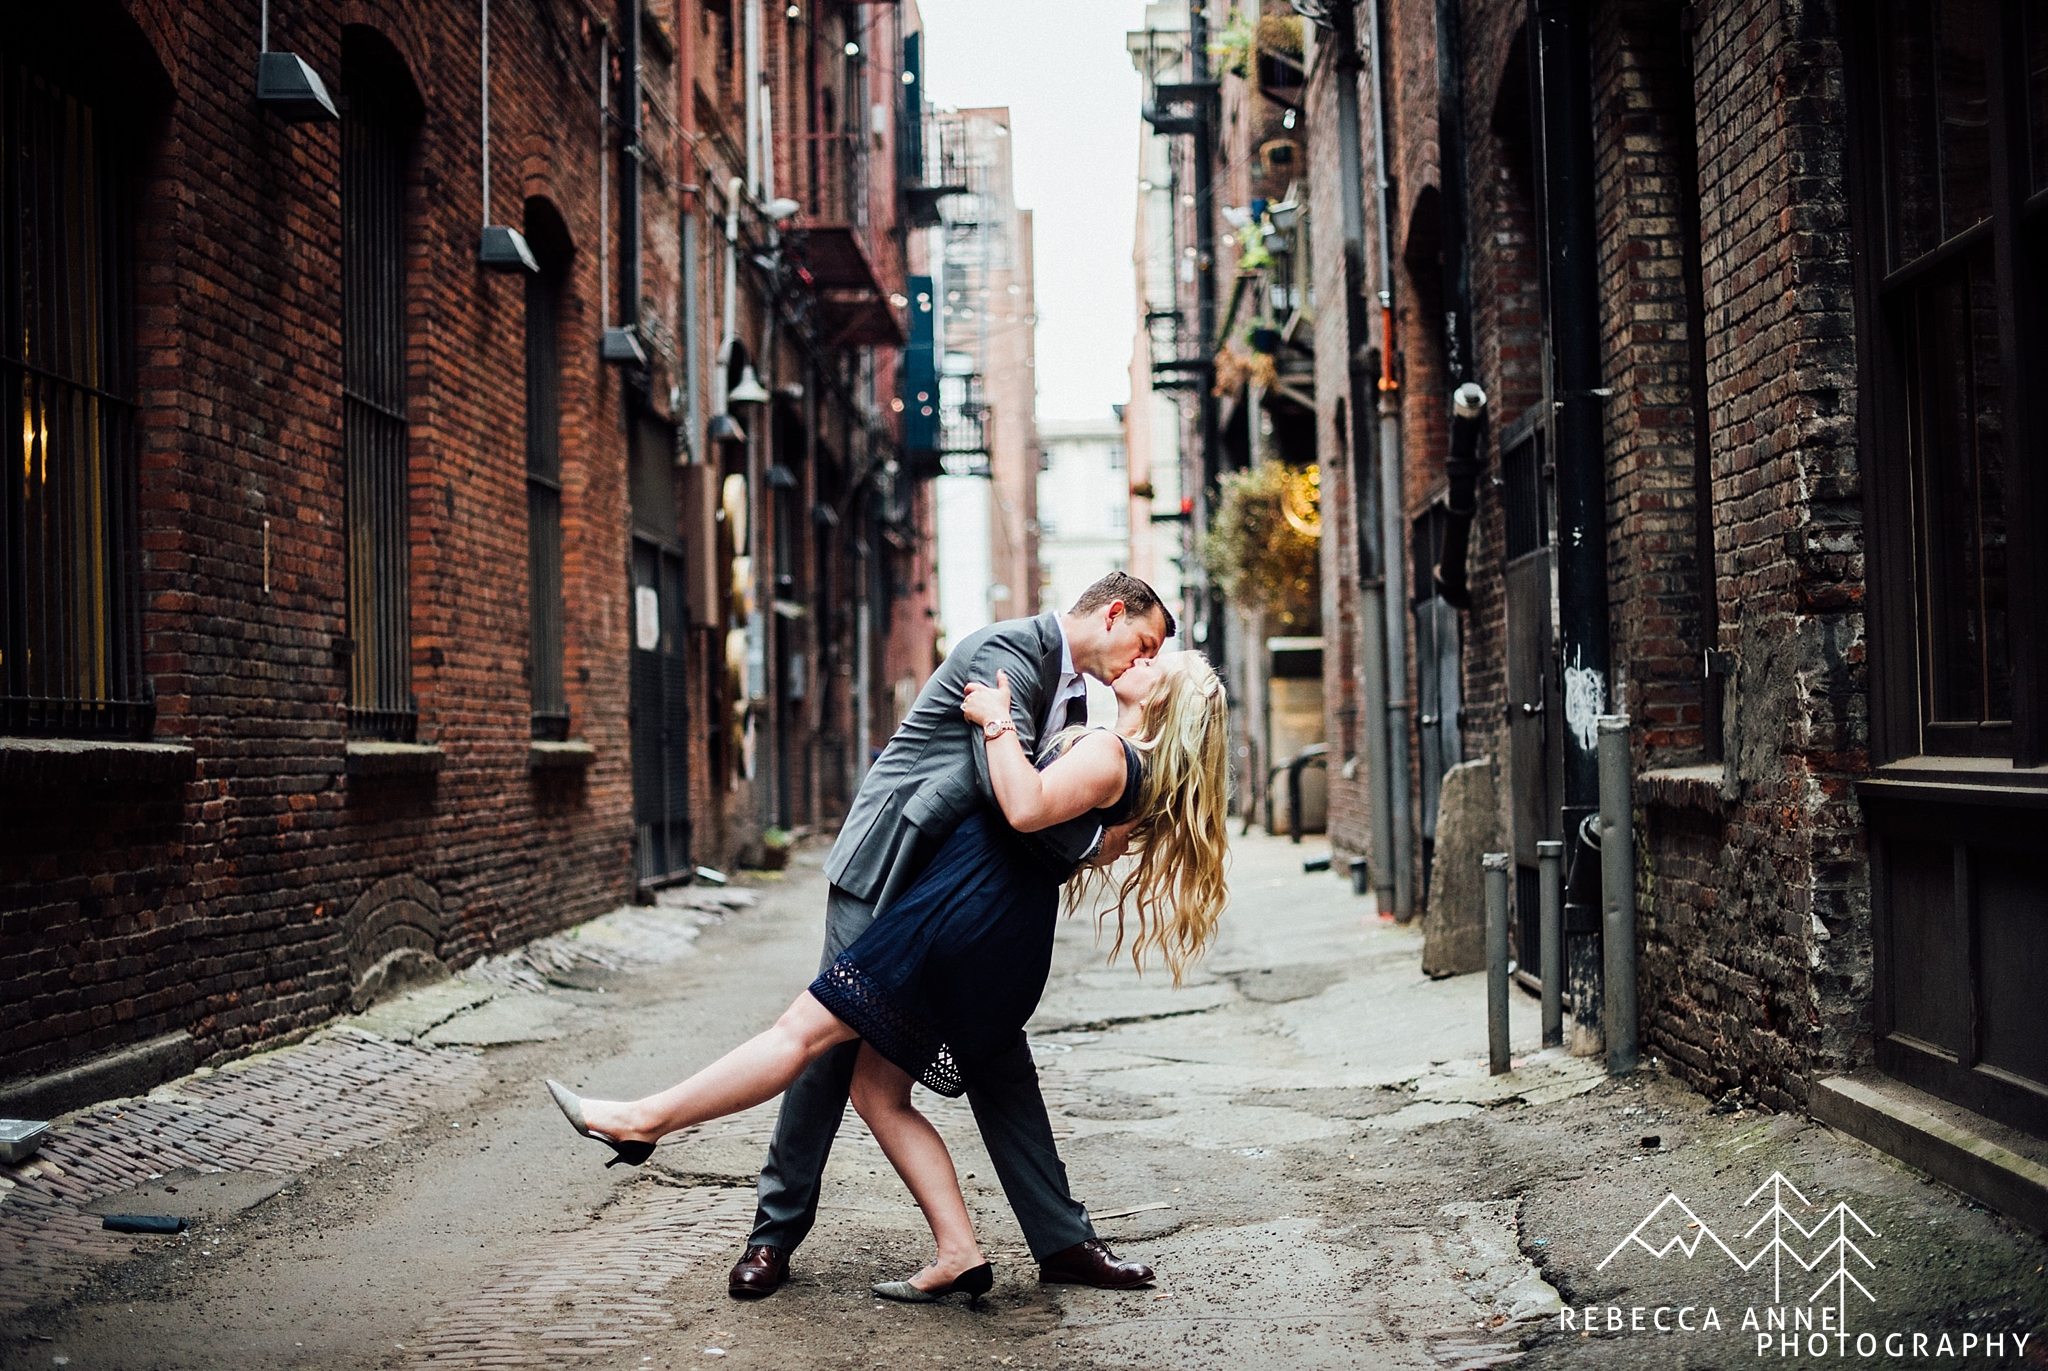 Downtown Seattle Engagement,Pioneer Square Engagement,Pike Place Market Engagement,Seattle Engagement Photos,Pioneer Square Engagement Photos,PIke Place Market Engagement Photos,Seattle Engagement Photographer,Washington Engagement Photographer,PNW Engagement Photographer,